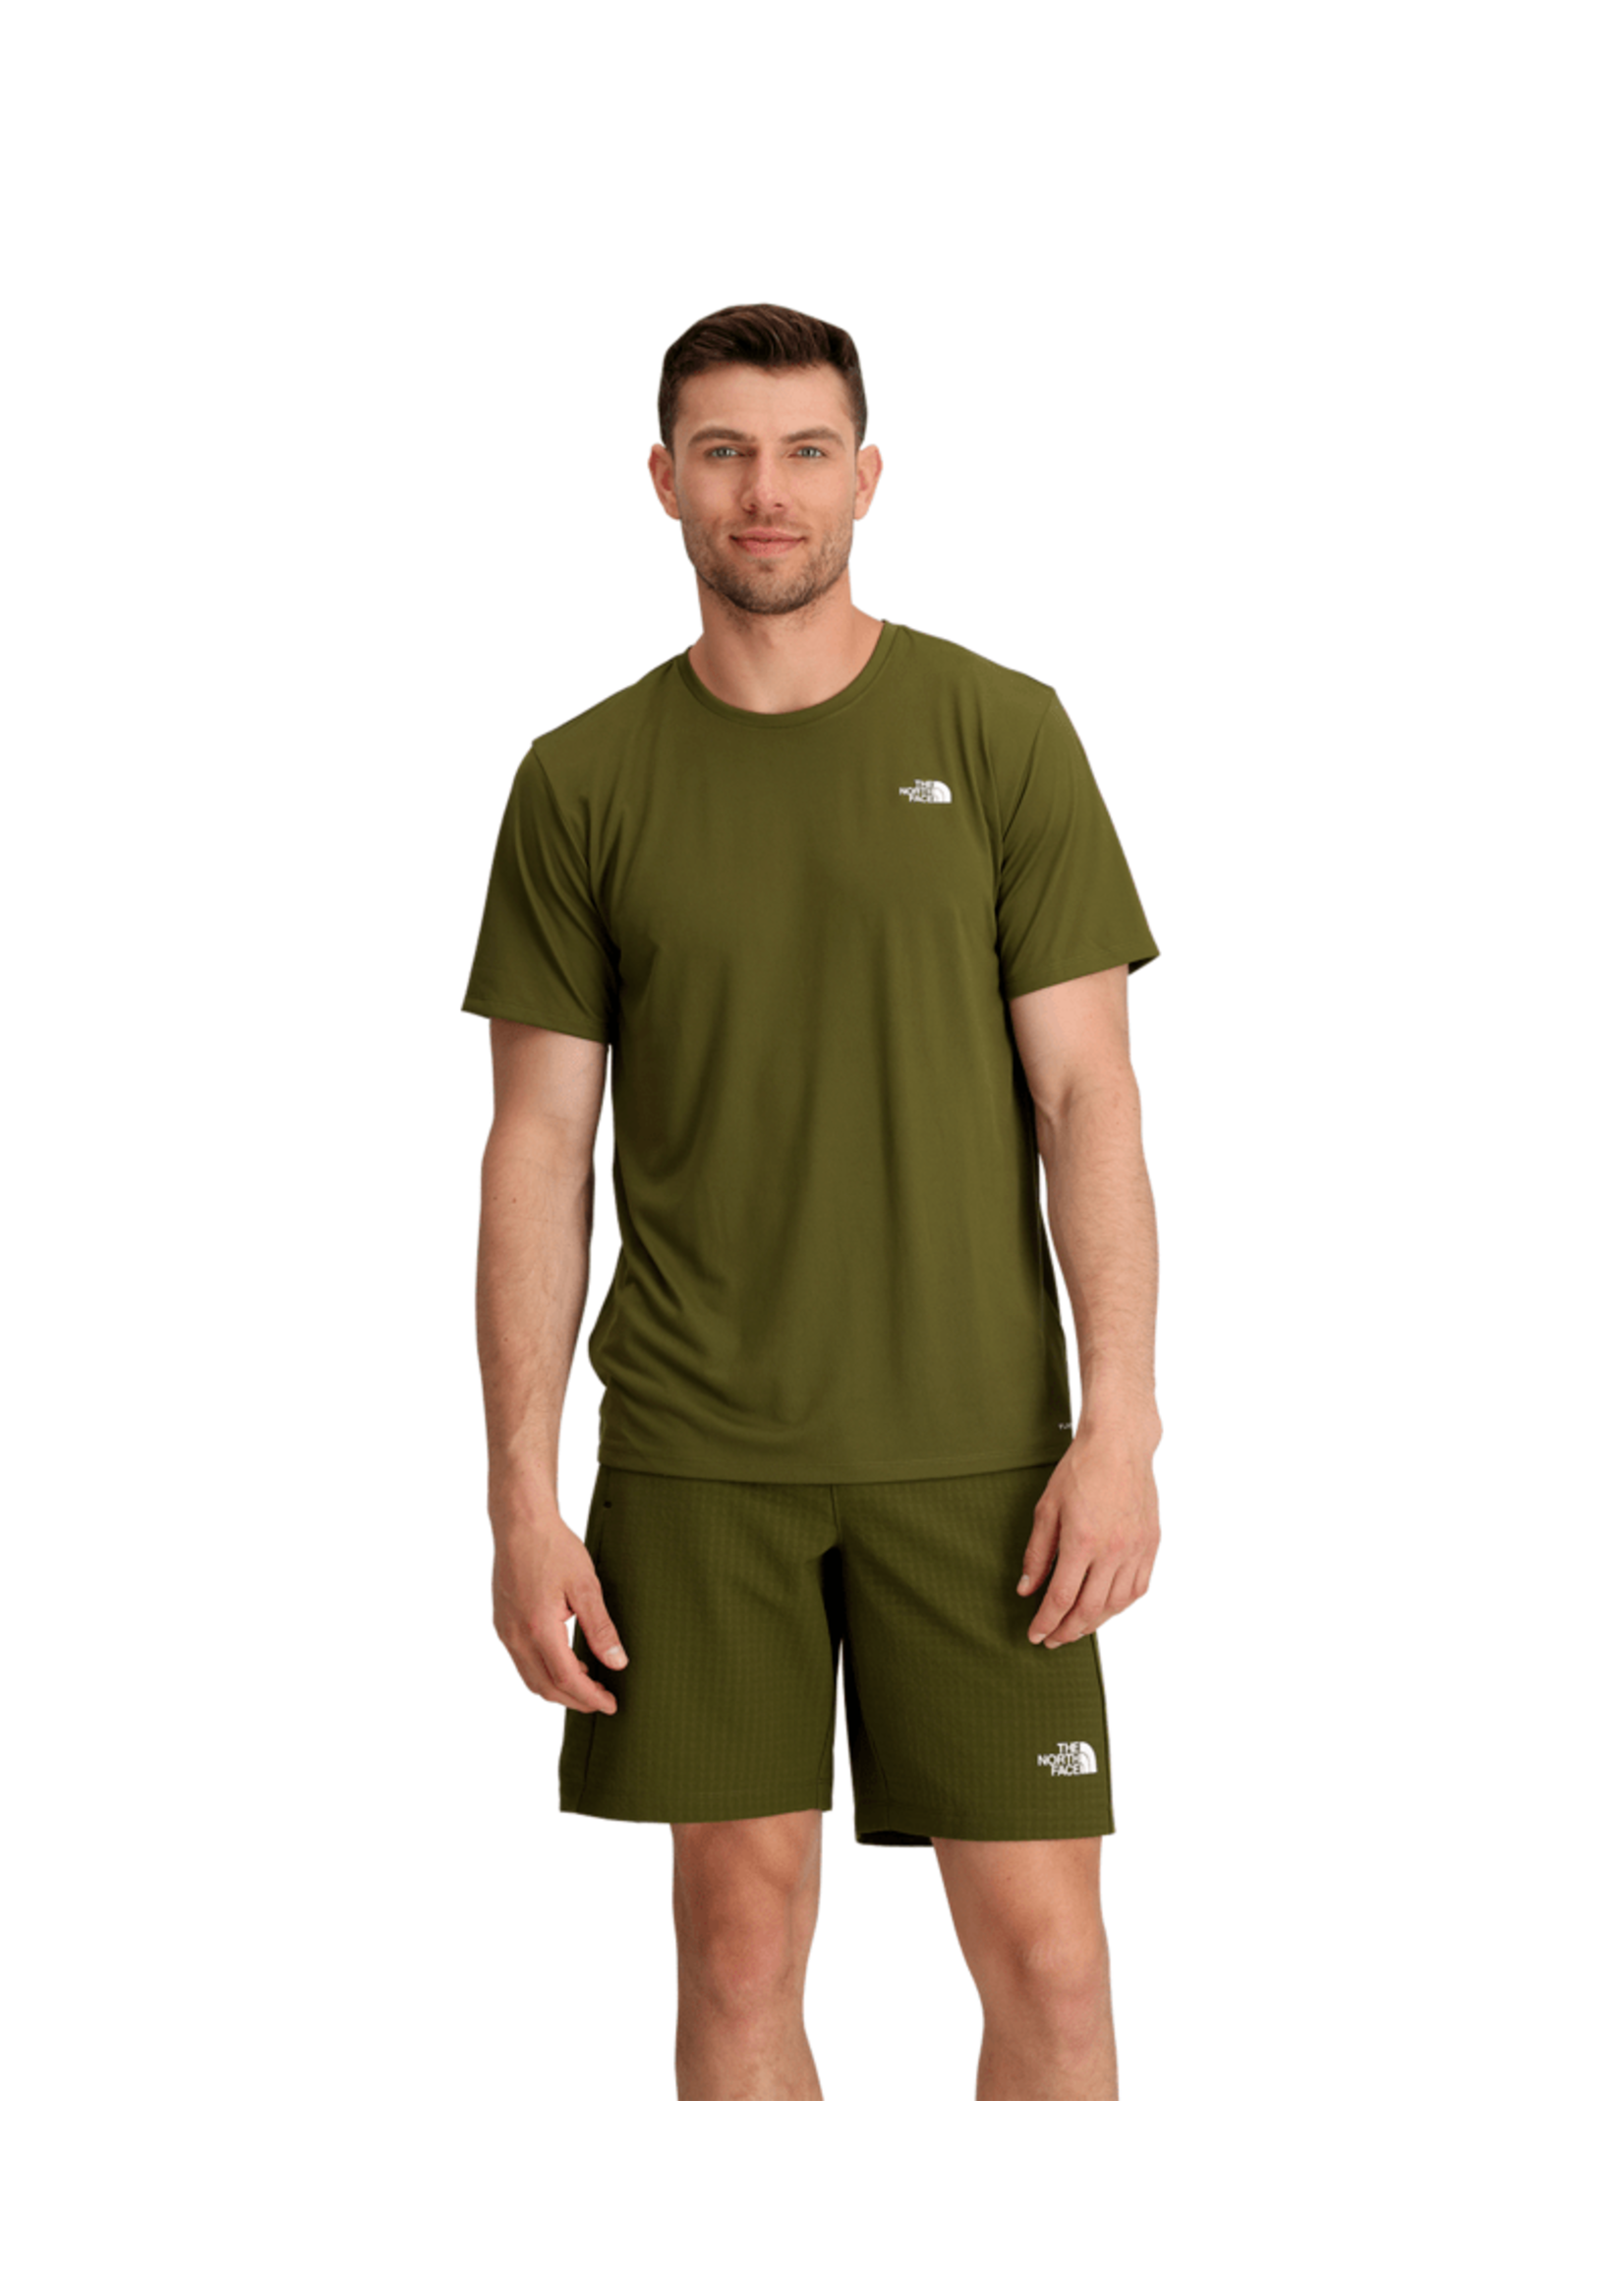 The North Face Men's Elevation Short-Sleeve Tee - Forest Olive